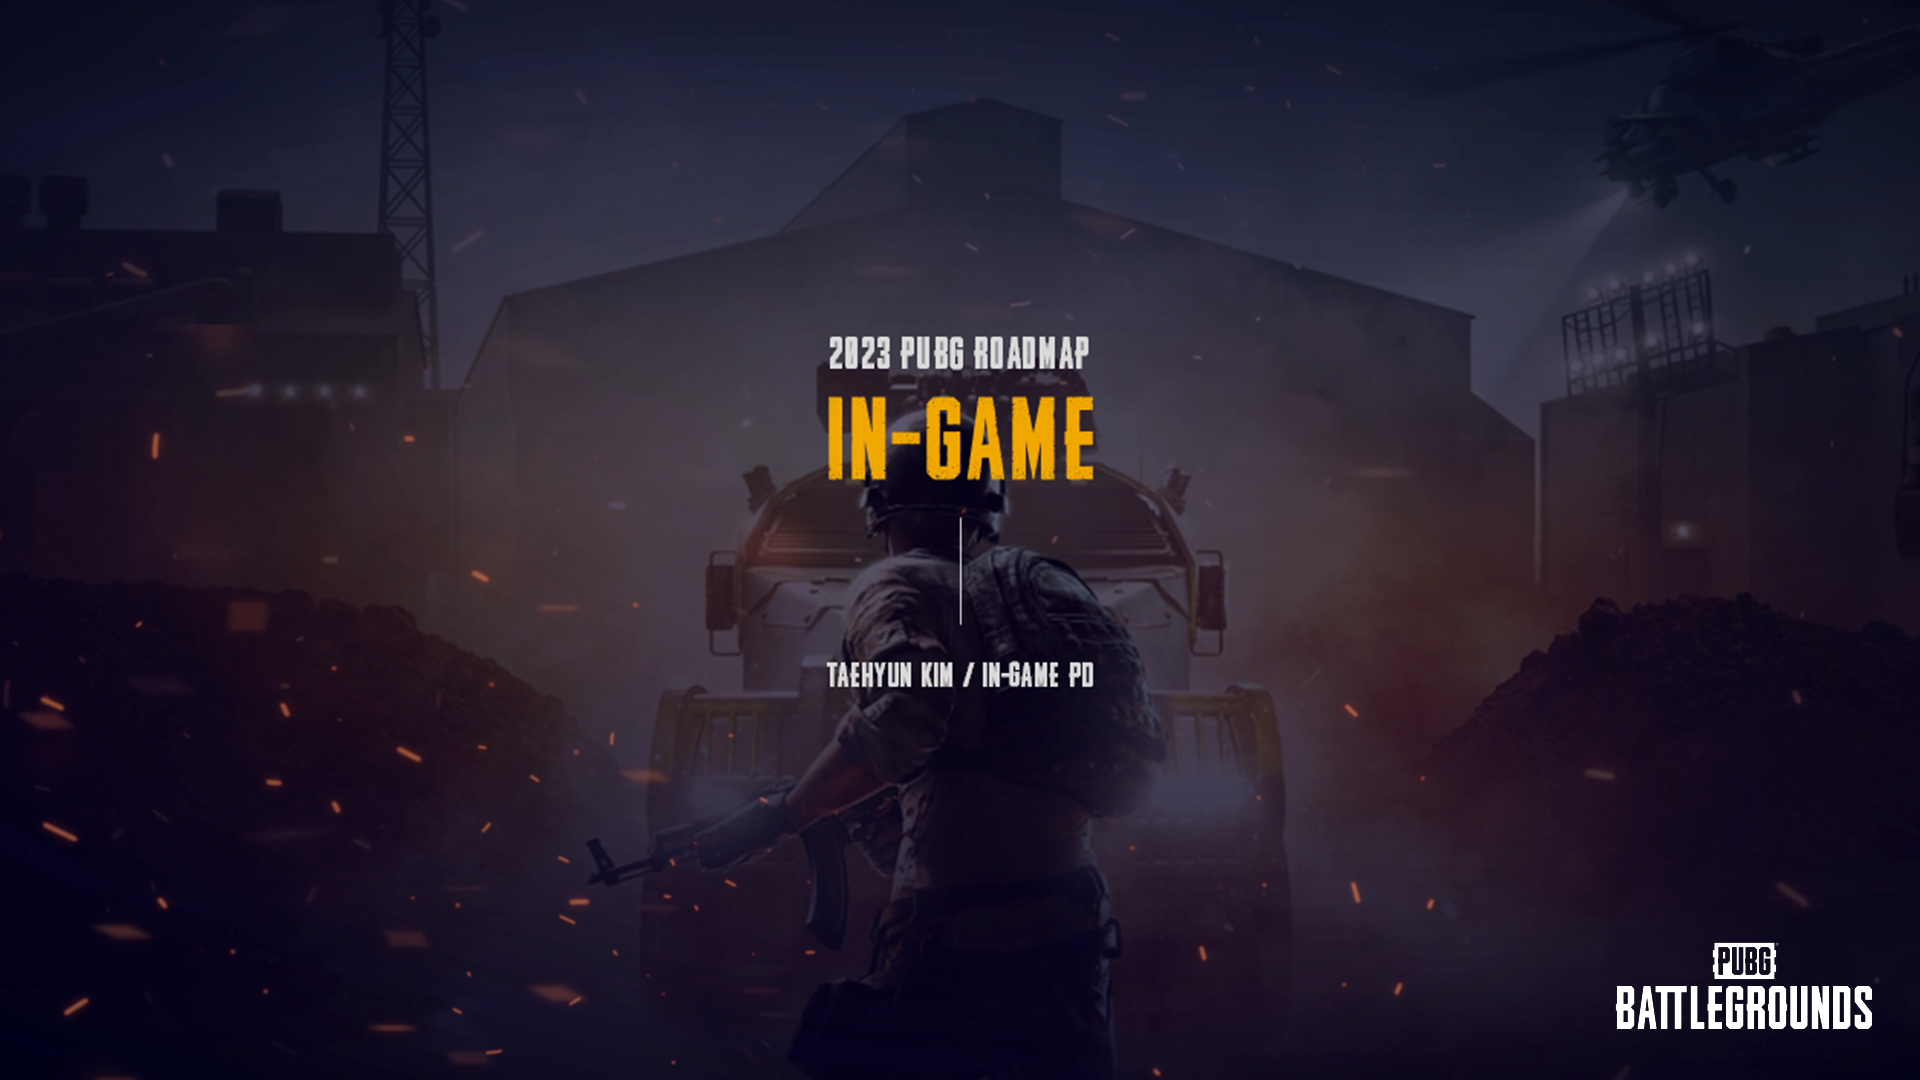 pubg on pc 2019, Game play live, Long drive